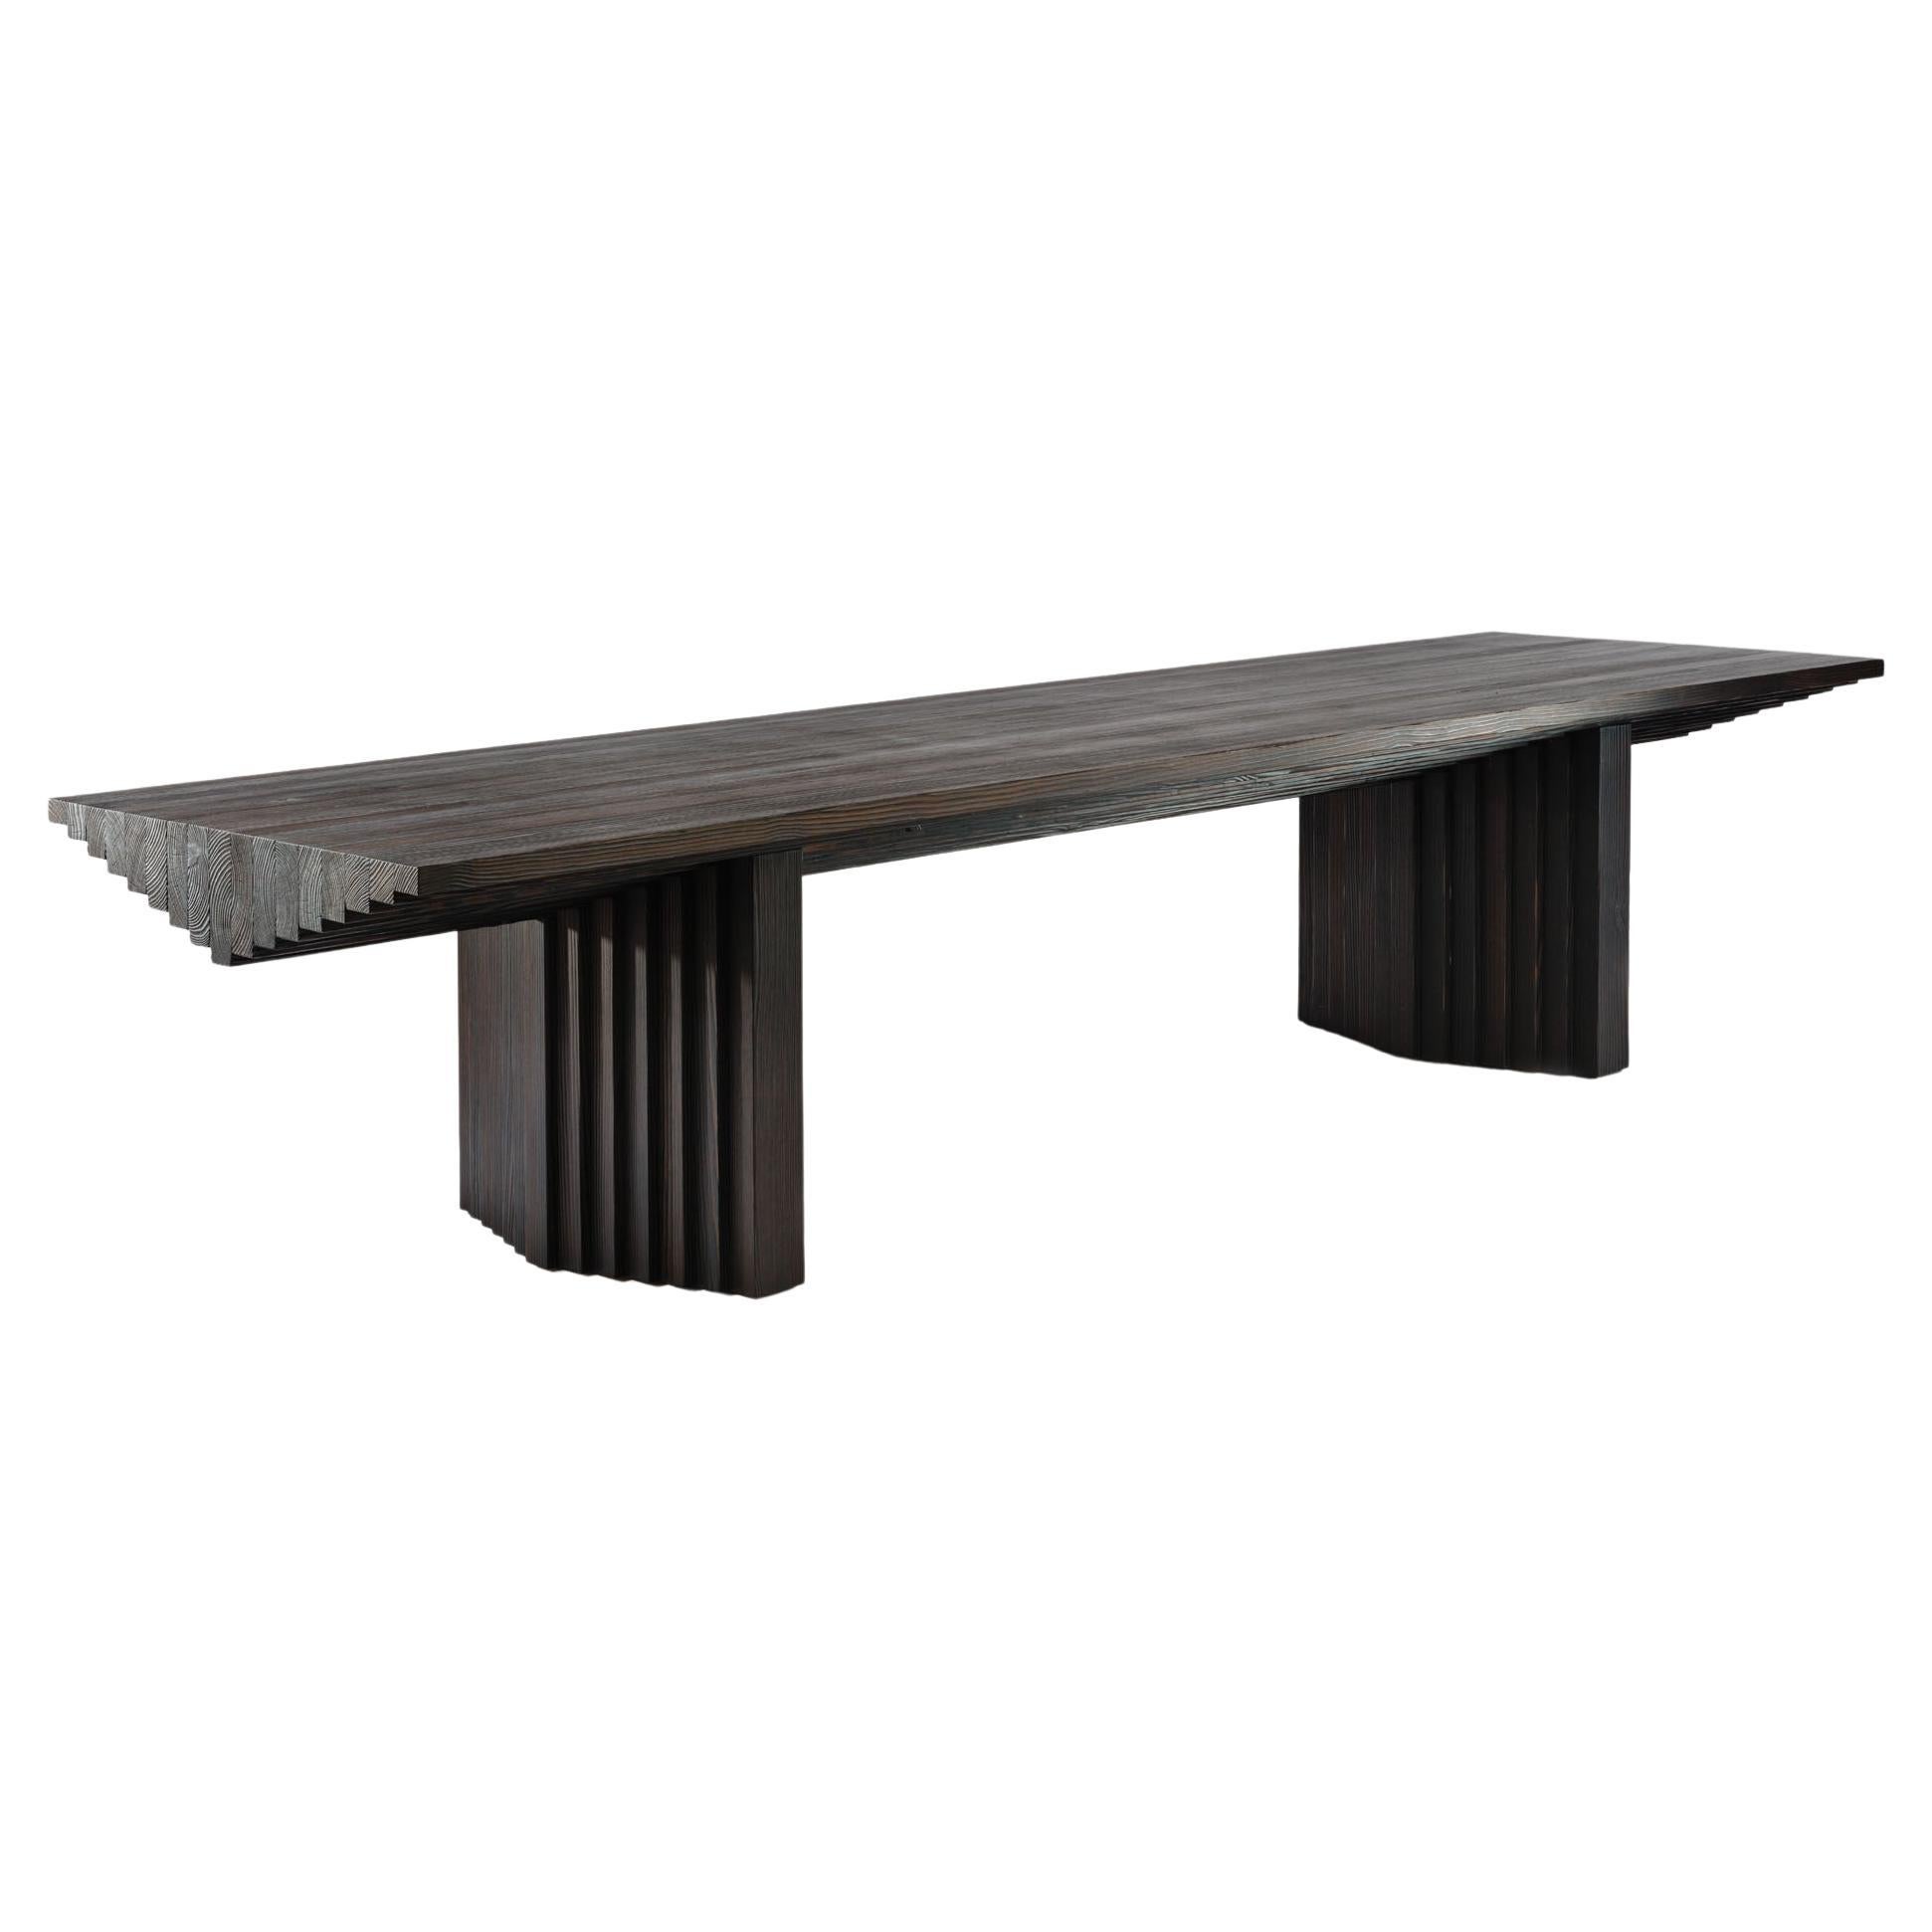 Contemporary Solid Burned Pine, Geometrical Ater Dining Table by Tim Vranken